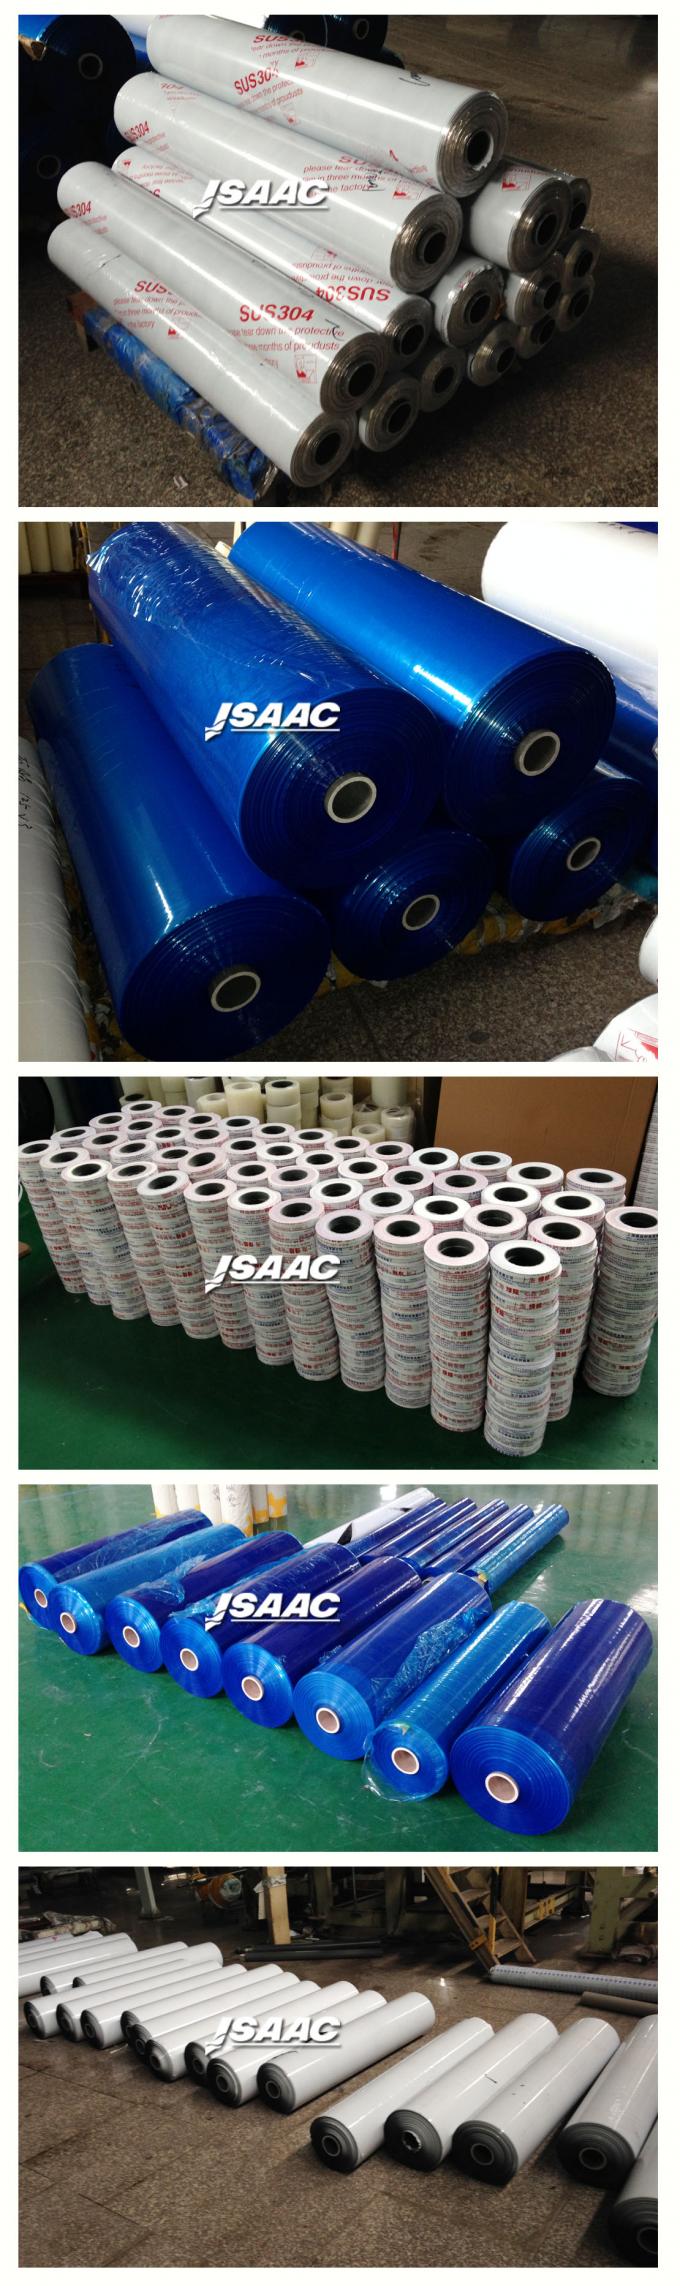 Adhesive Coated Carpet Protective Film